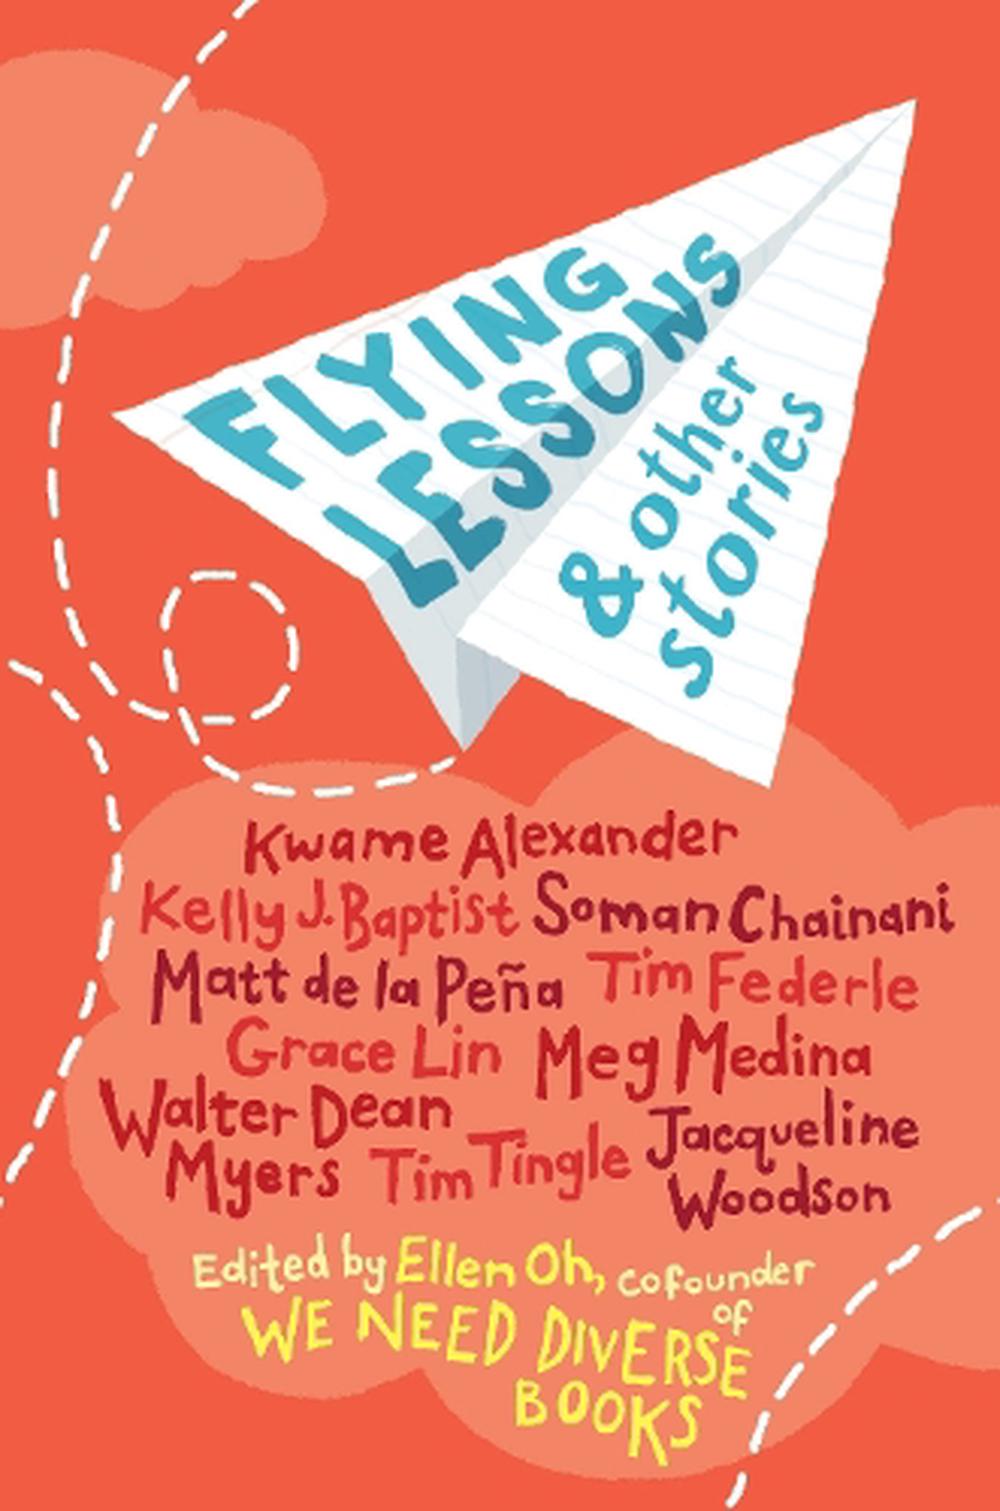 Ellen Oh: Flying Lessons & Other Stories (2017)